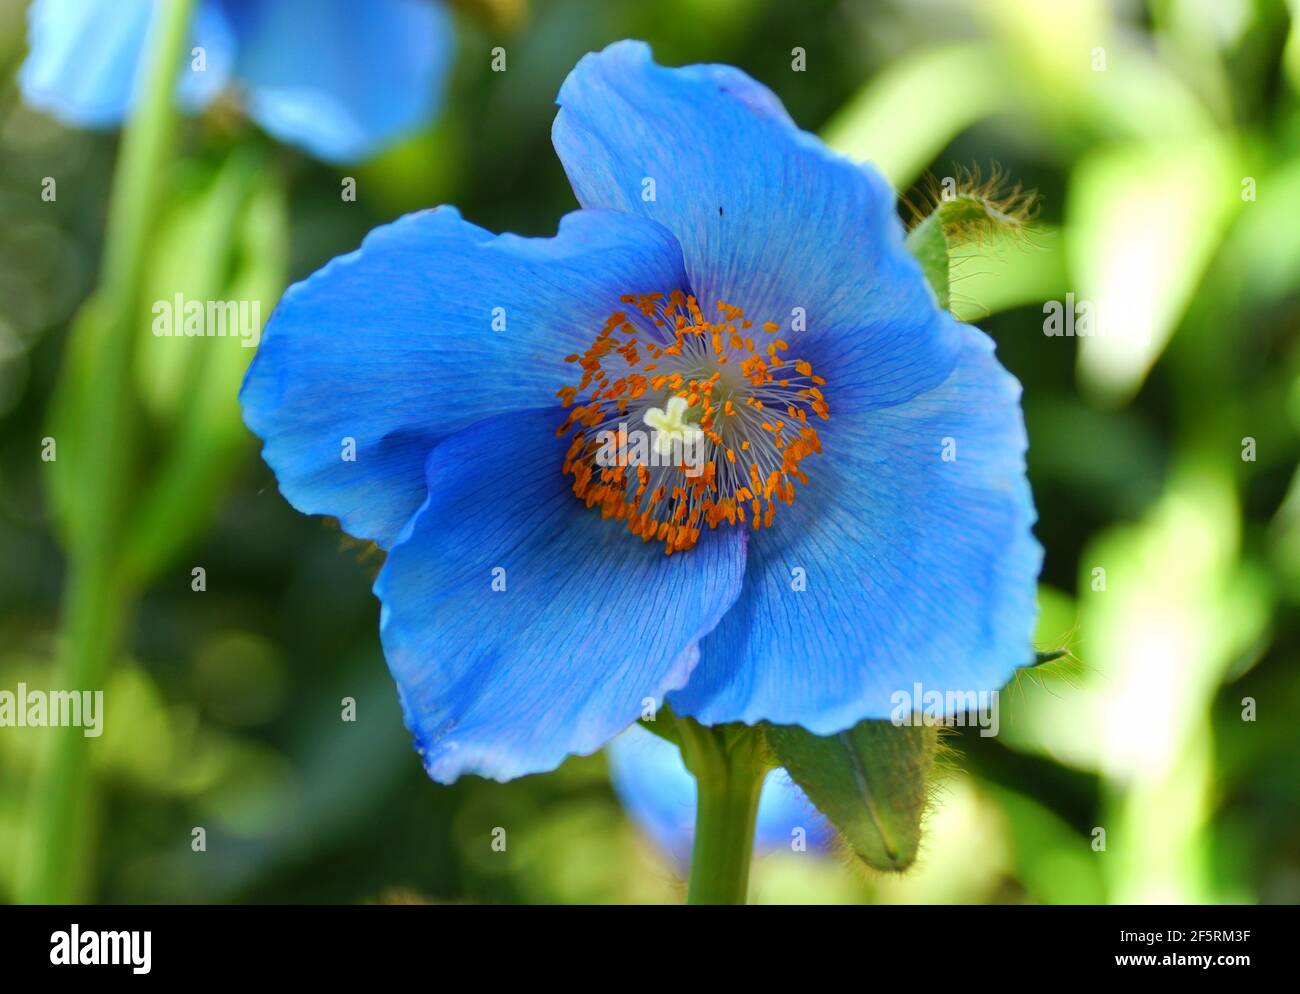 Close up of a beautiful Blue Poppy 'Lingholm' flower Stock Photo